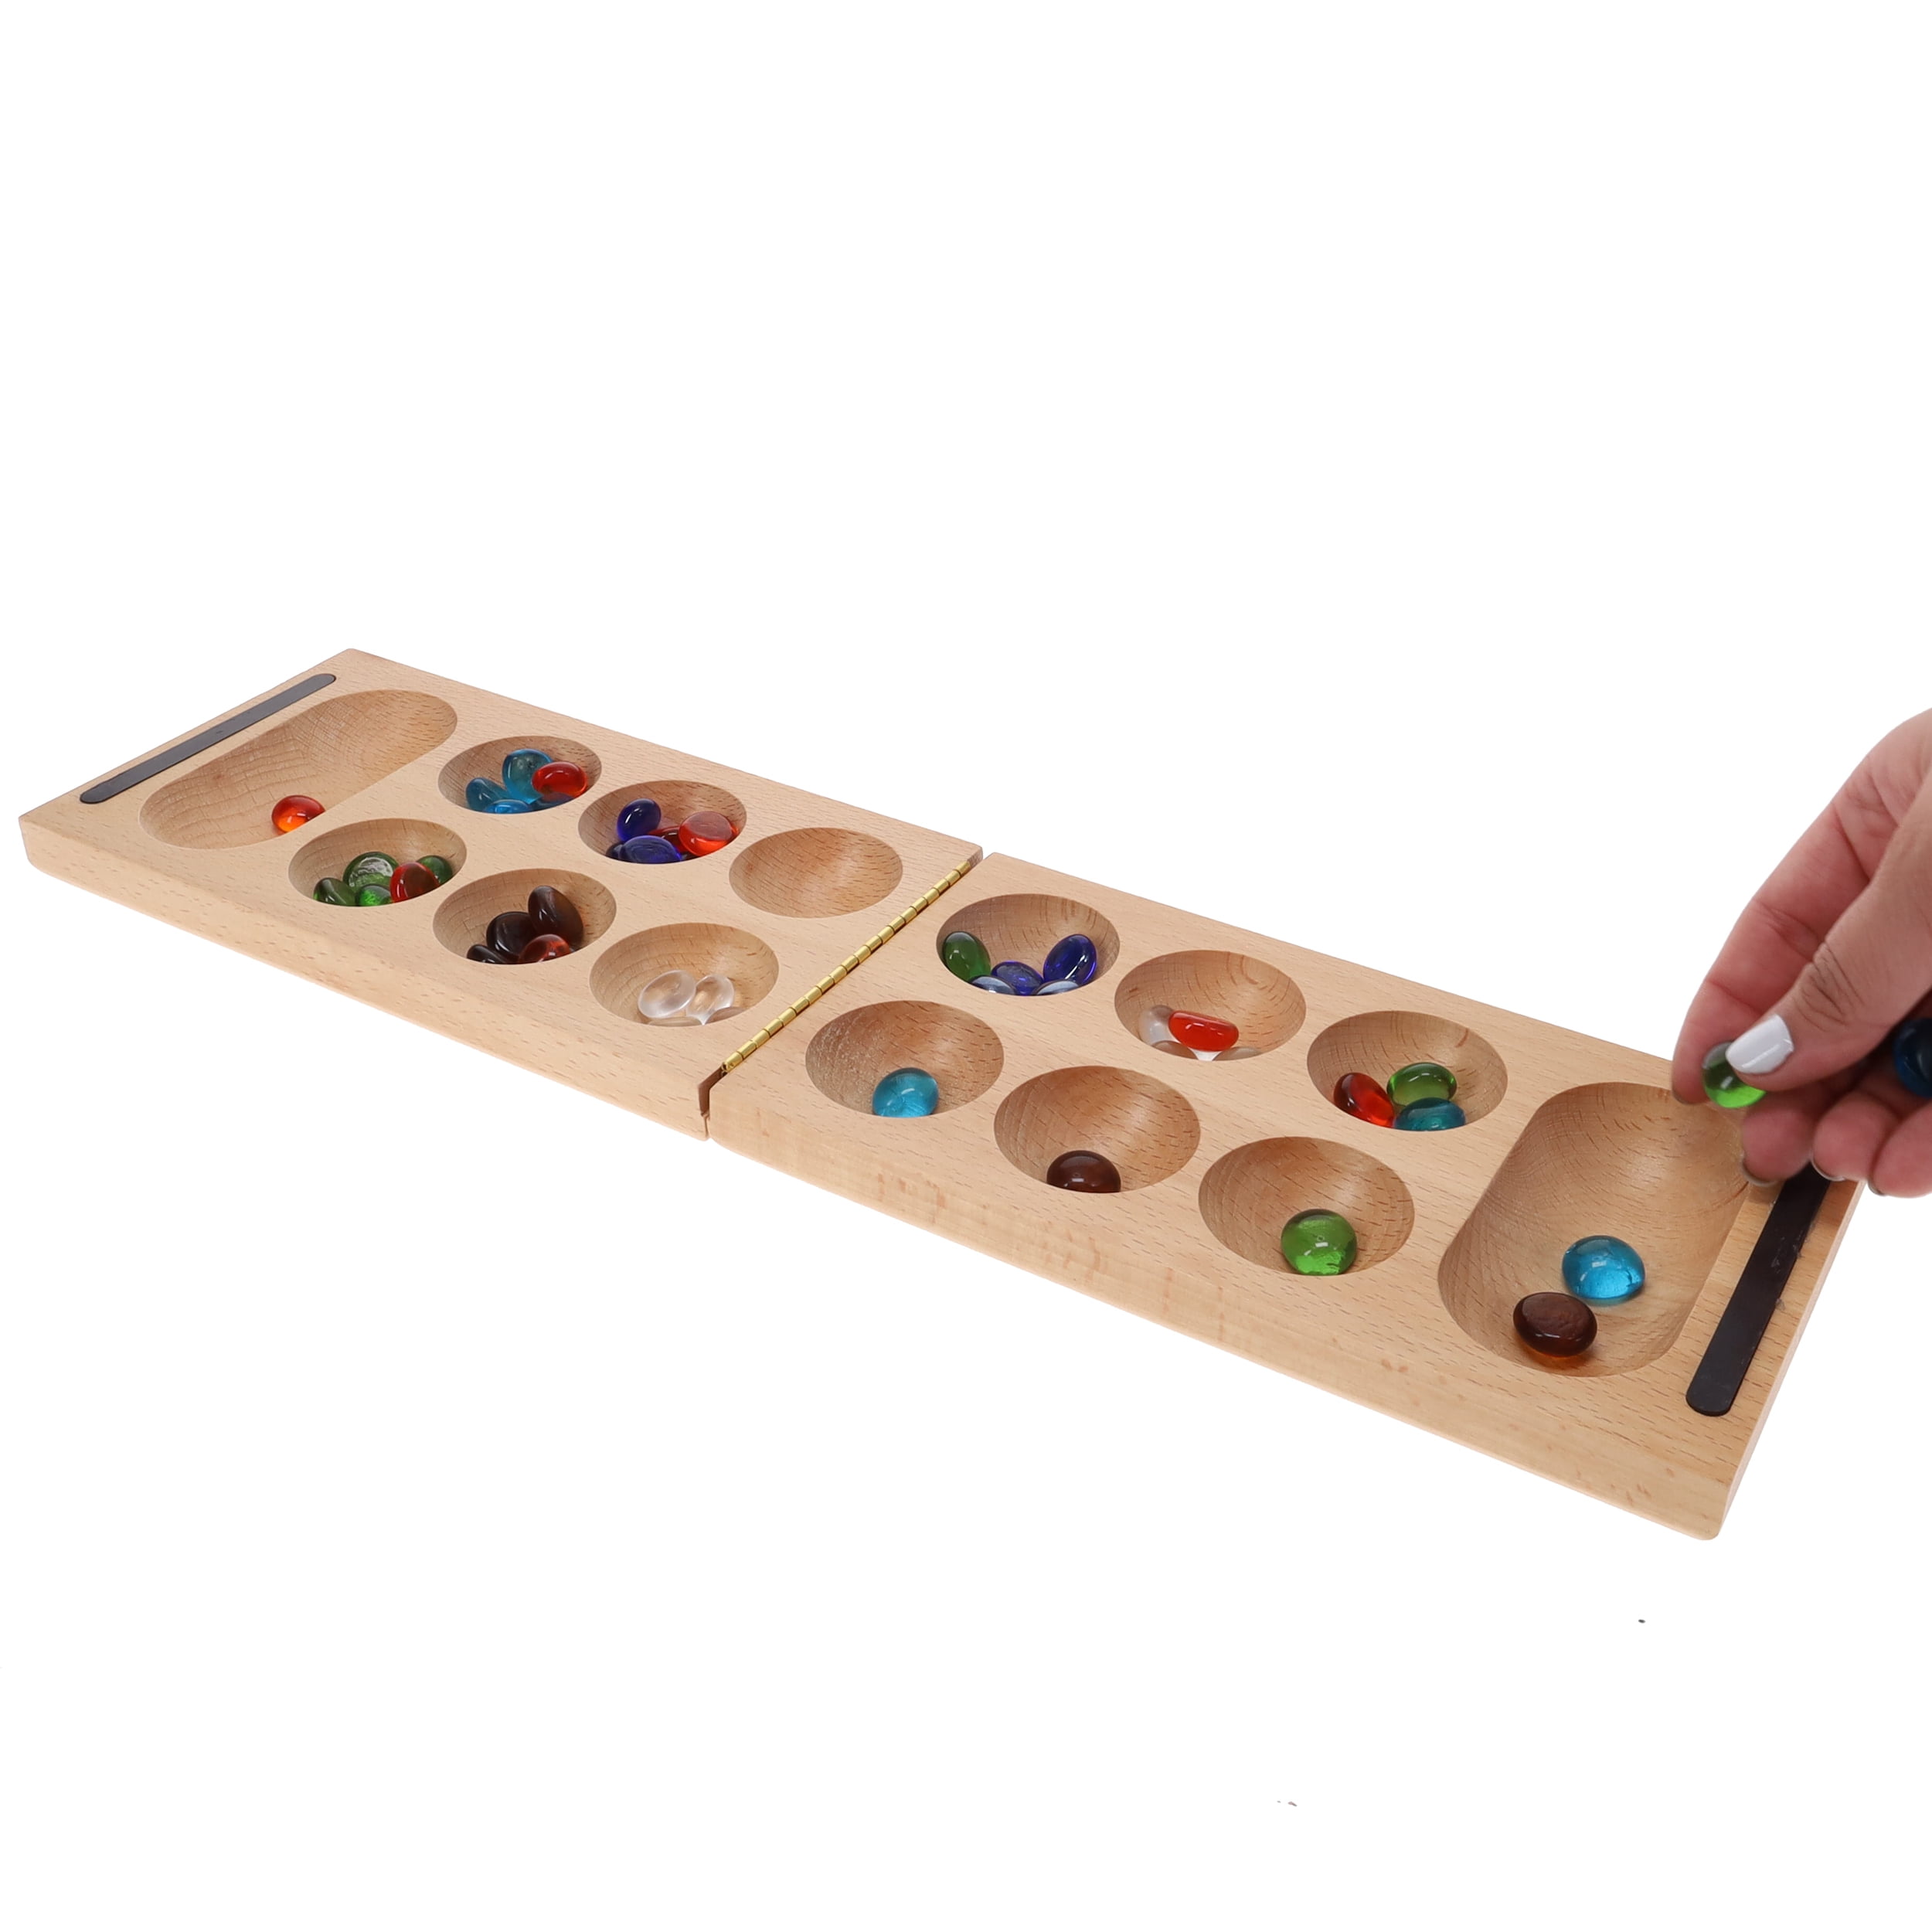 WE Games Solid Wood Folding Mancala Board Game - 18 in., Fun Games for  Family Game Night, Family Games, Travel Games for Adults, Home Decor,  Living